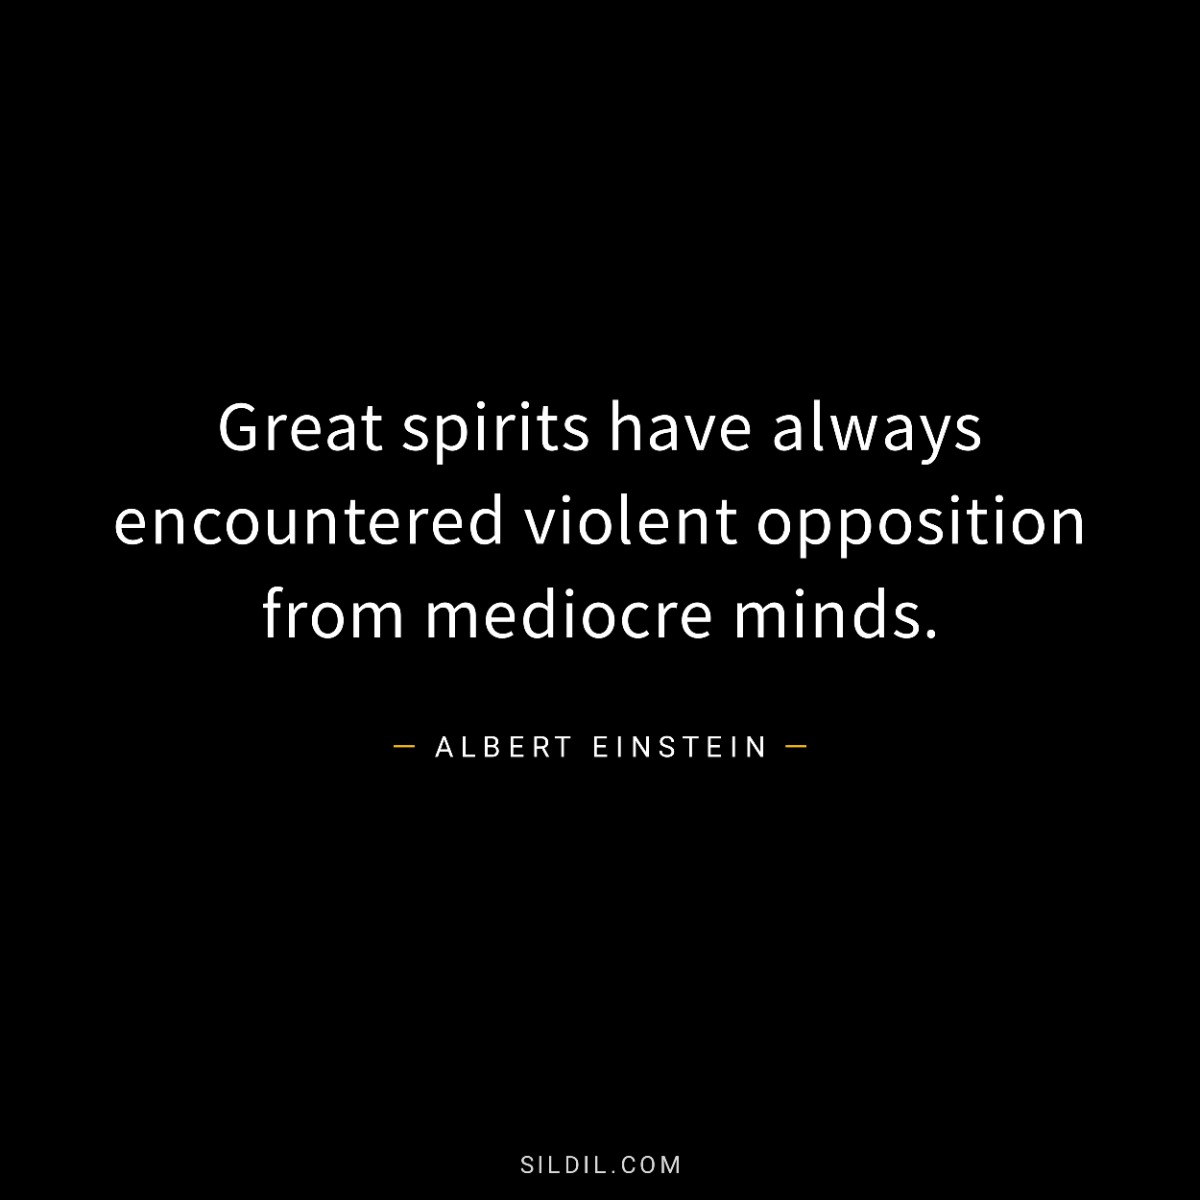 Great spirits have always encountered violent opposition from mediocre minds.